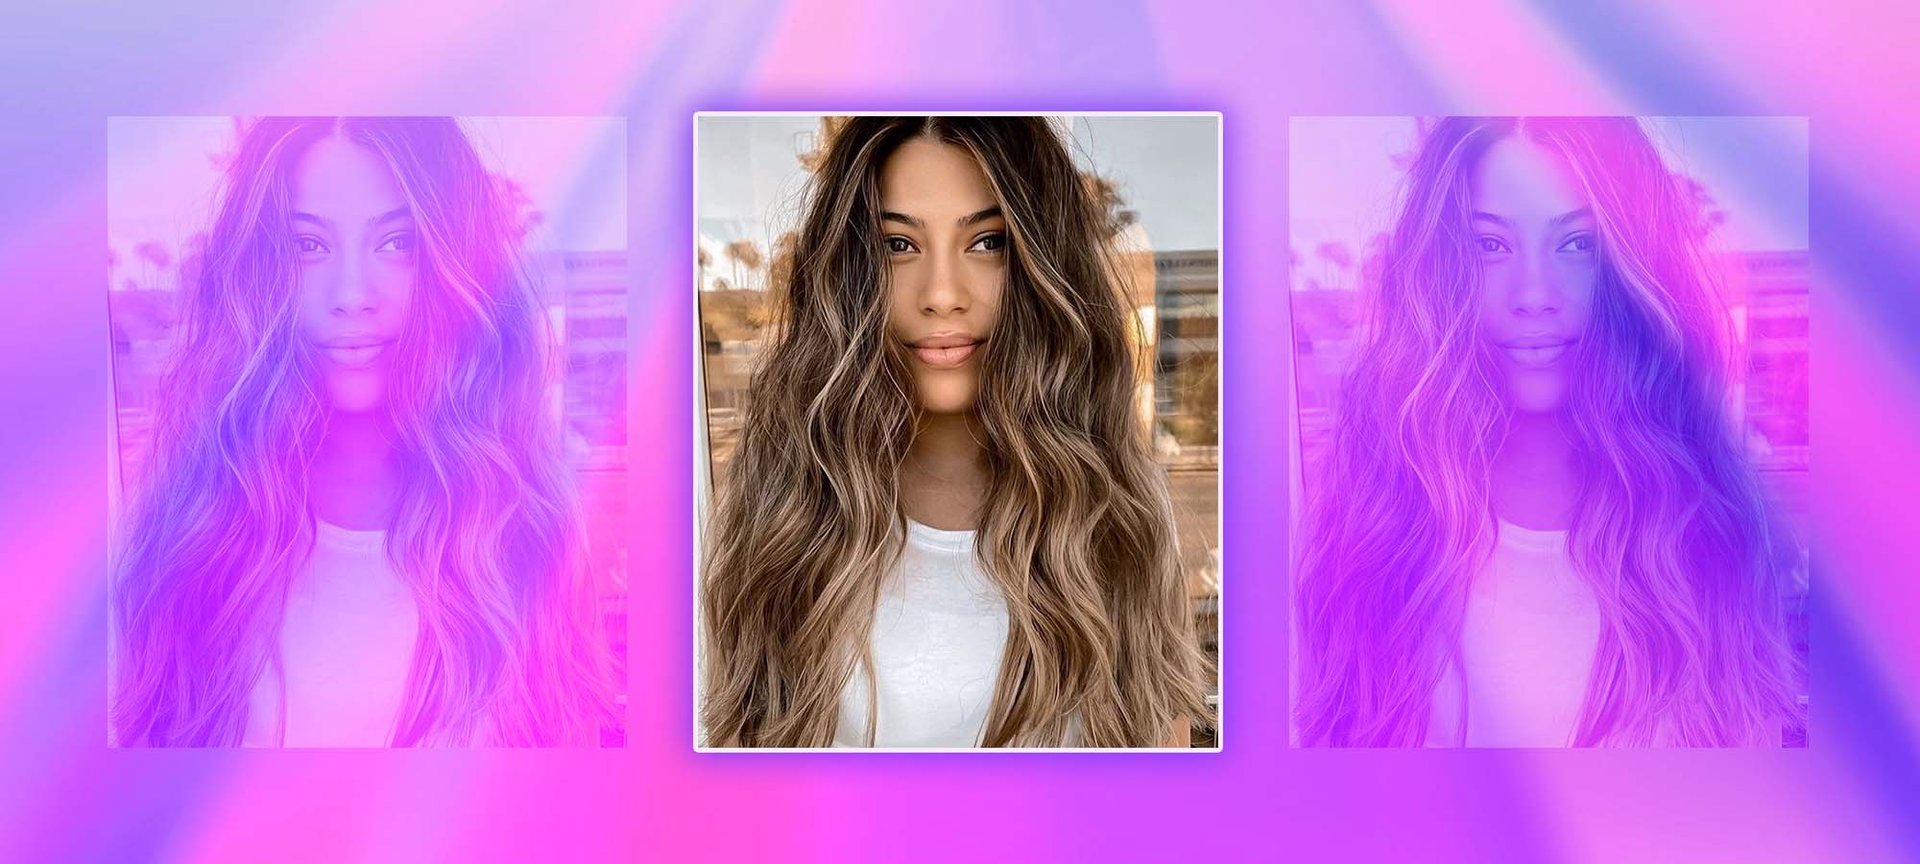 Balayage vs Foils: What's the Difference - Hemisphere Hair